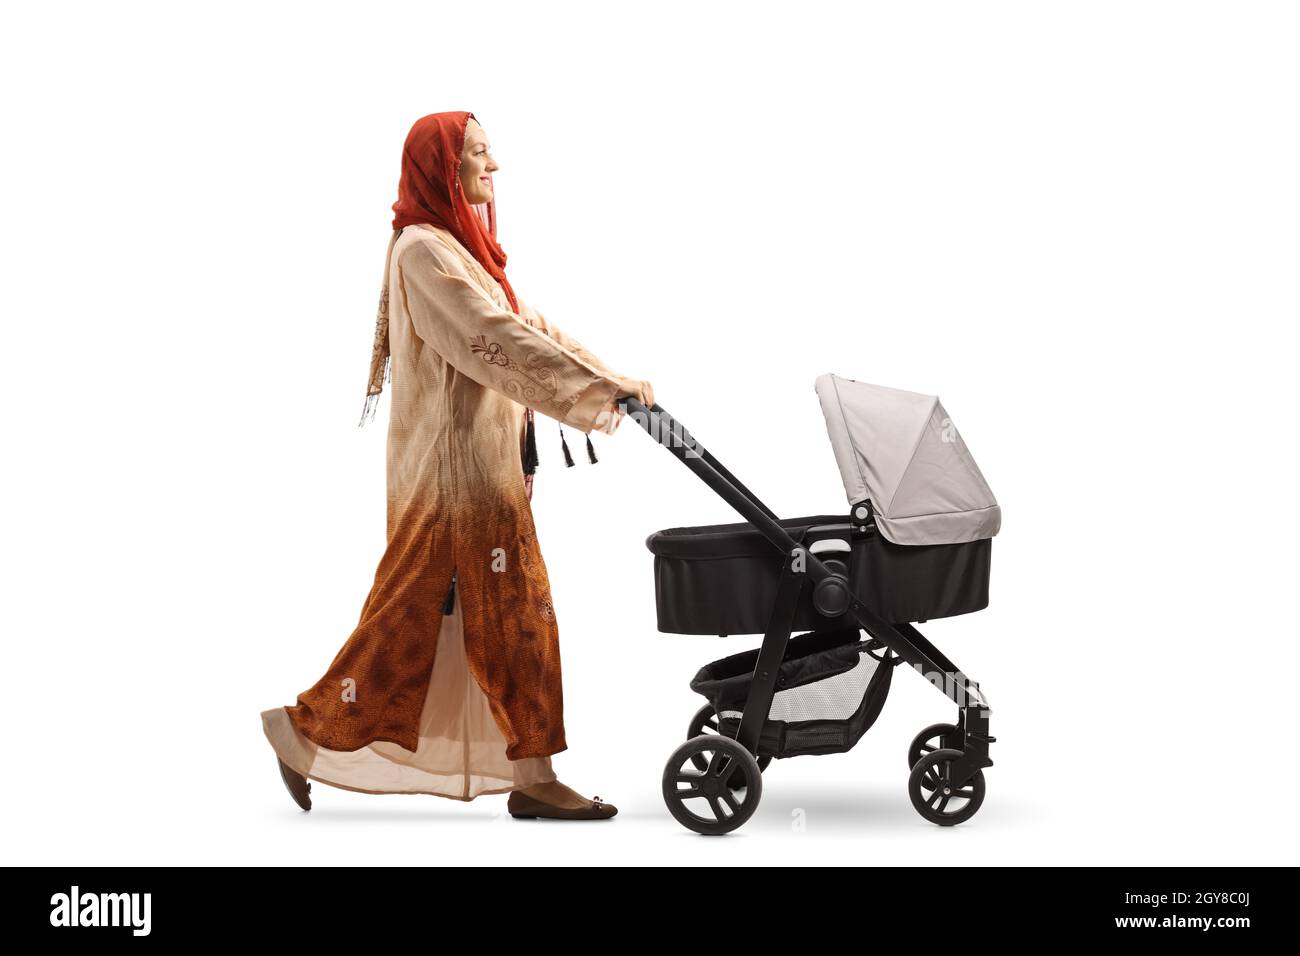 Full length profile shot of a woman wearing a hijab and pushing a baby stroller isolated on white background Stock Photo